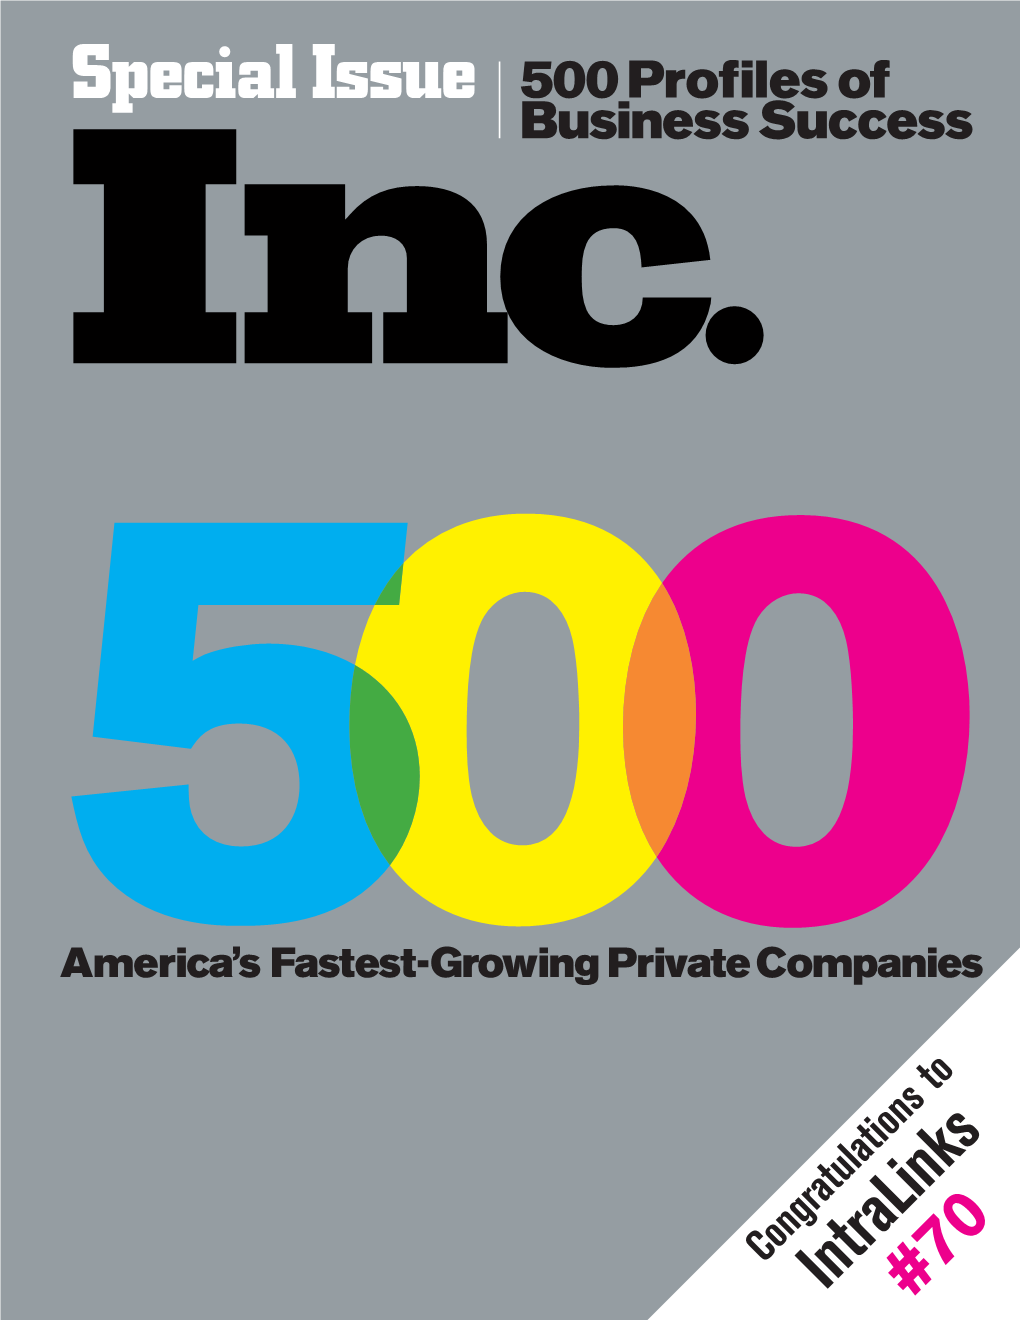 Special Issue 500 Profiles of Business Success